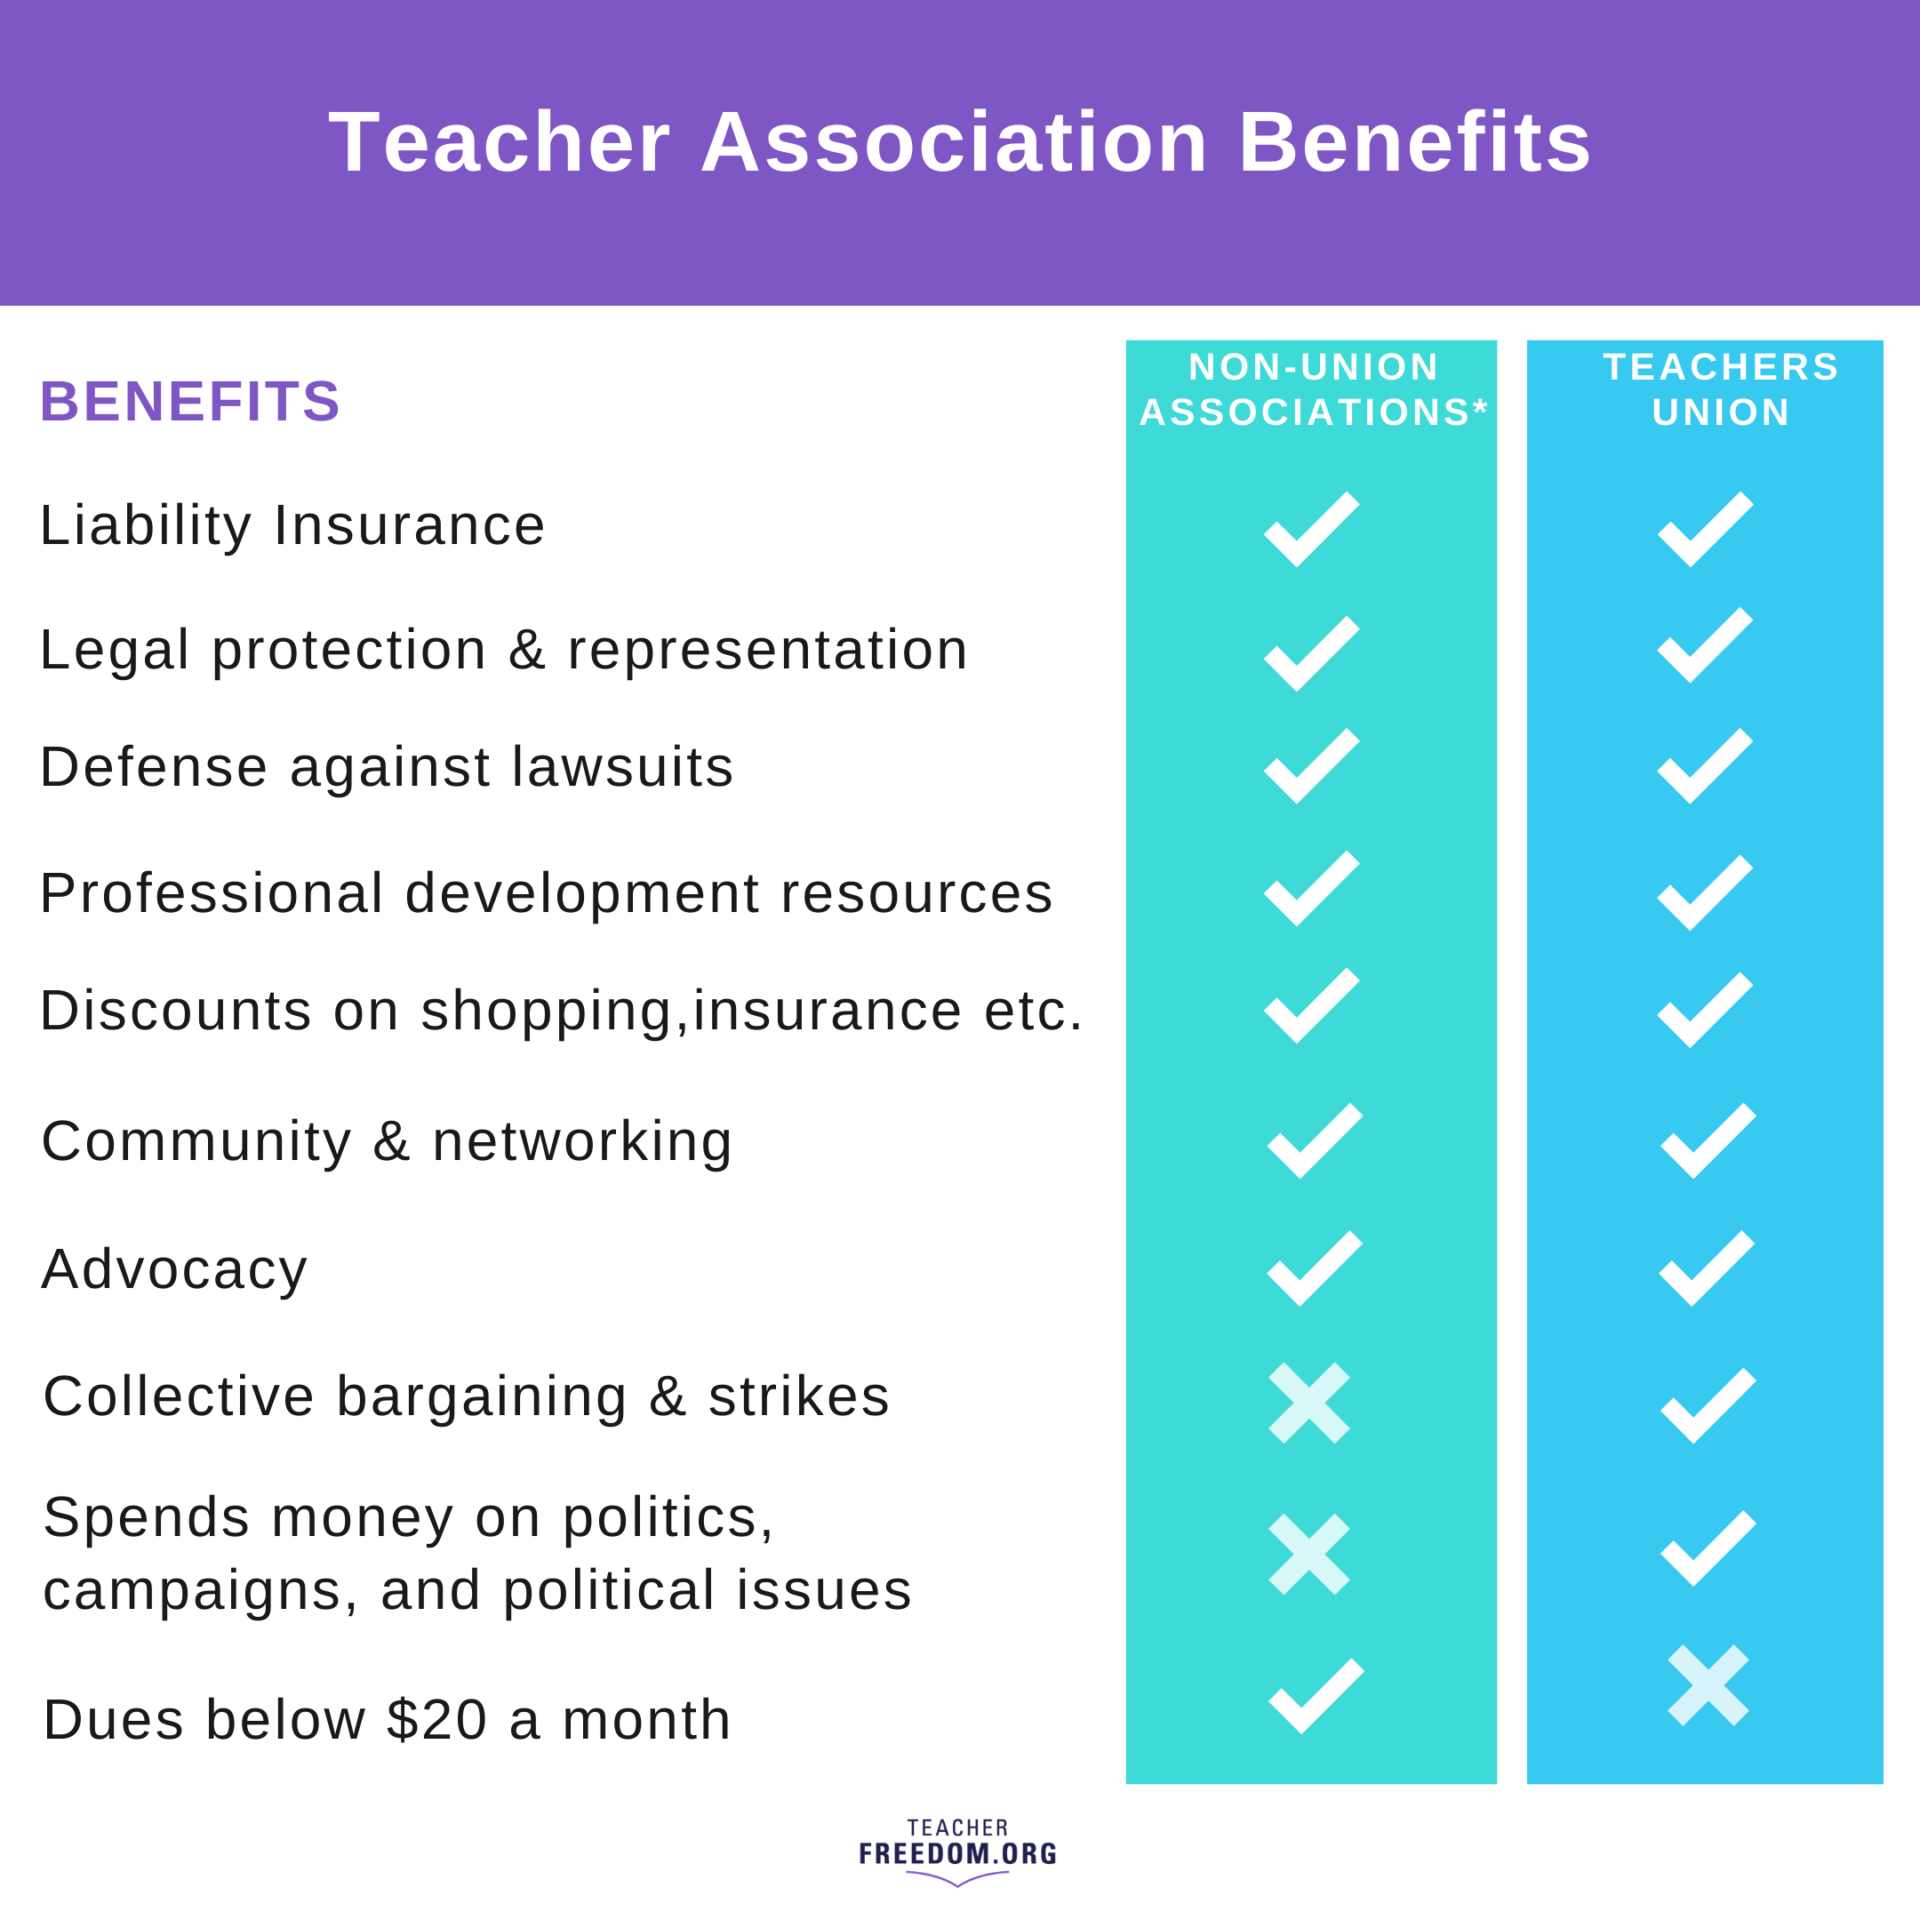 Teaching Benefits Is the Teachers Union Your Only Option? Teacher